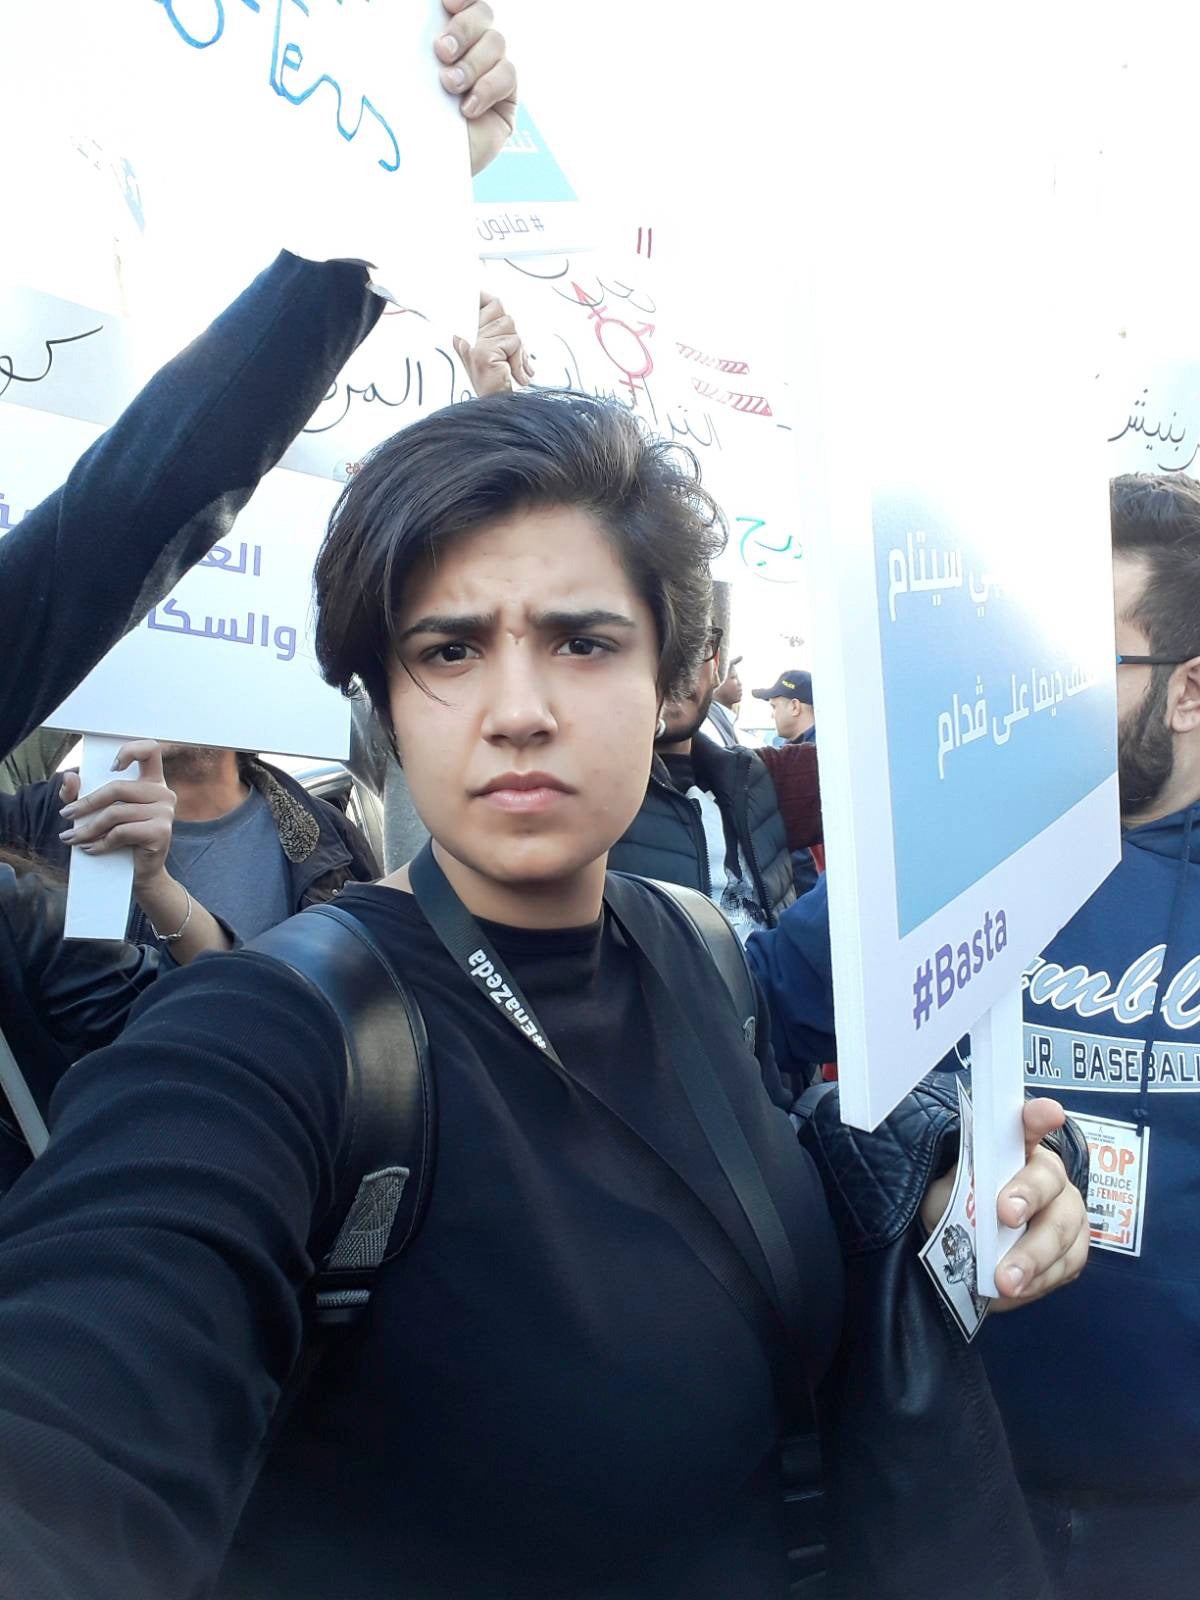 An activist at a protest